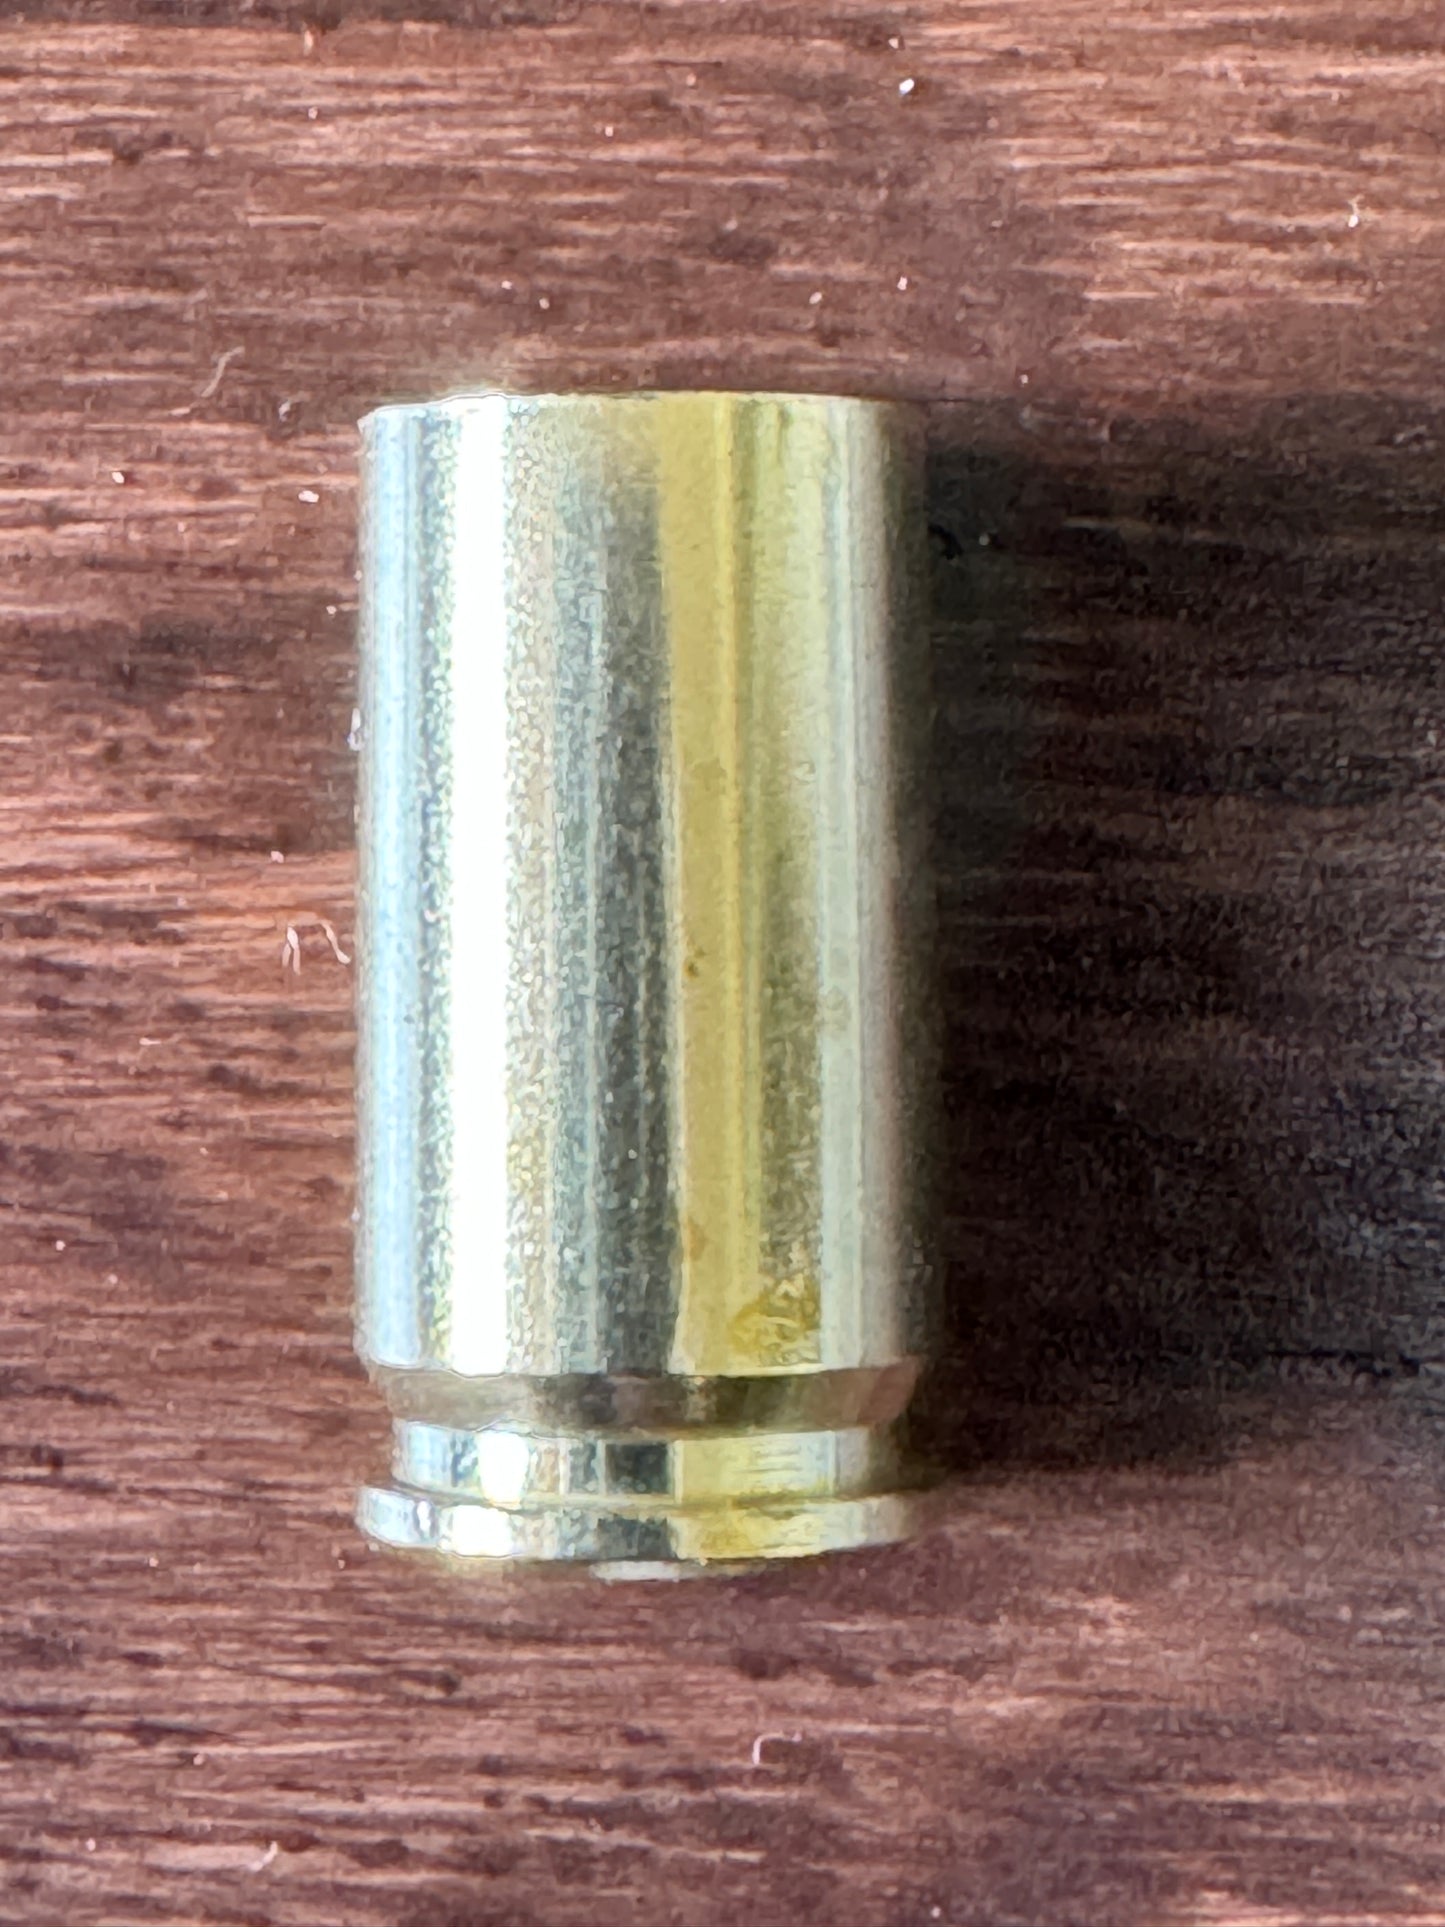 9x19 Luger brass - Processed - (1000 ct)